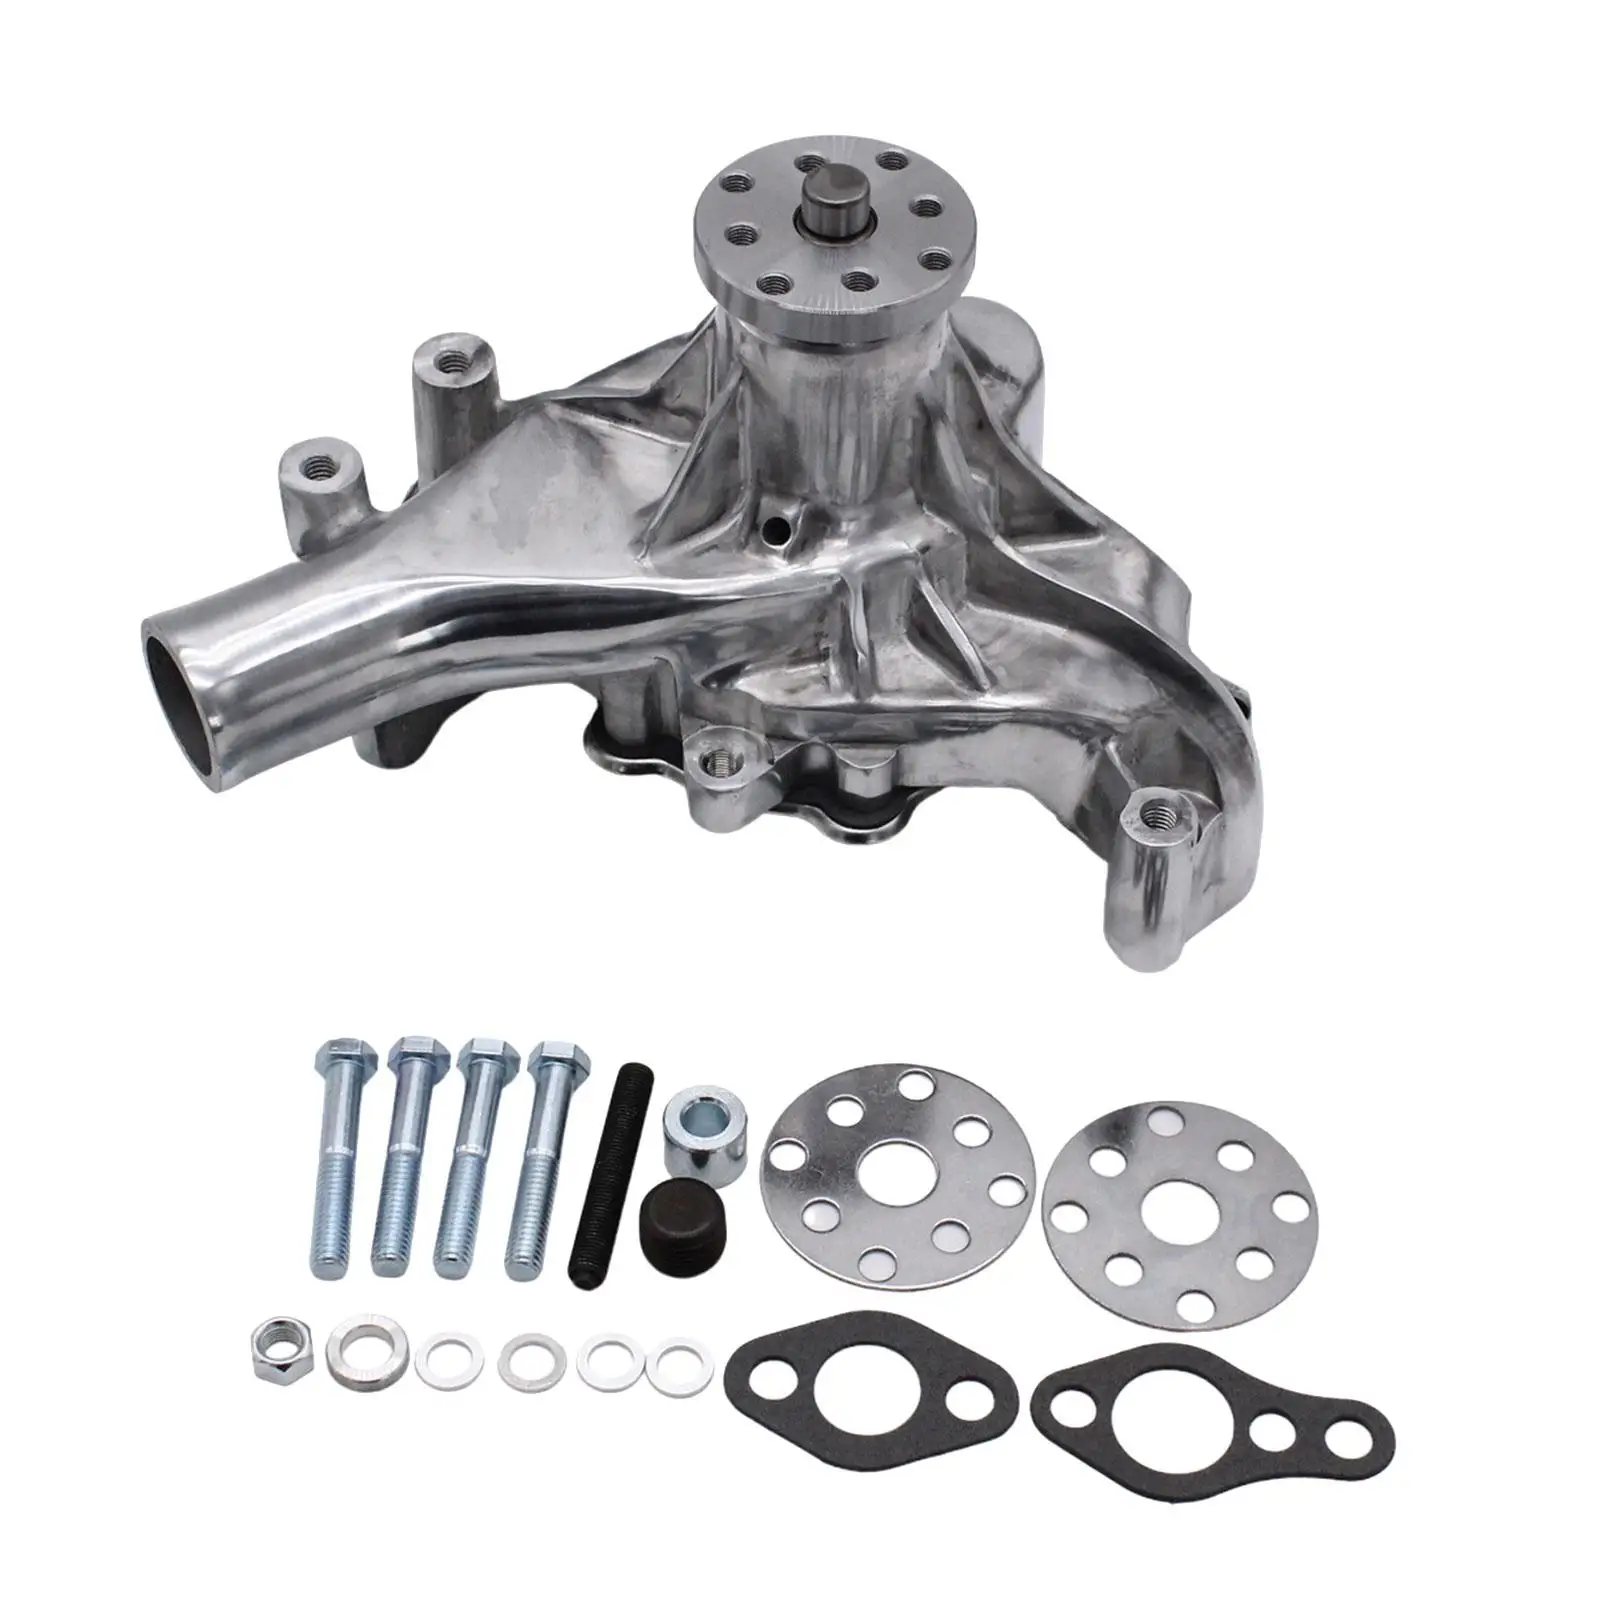 Long Water Pump Direct Replaces Attachment High Performance Easy to Install Automobile Accessory for Chevy 283 327 350 383